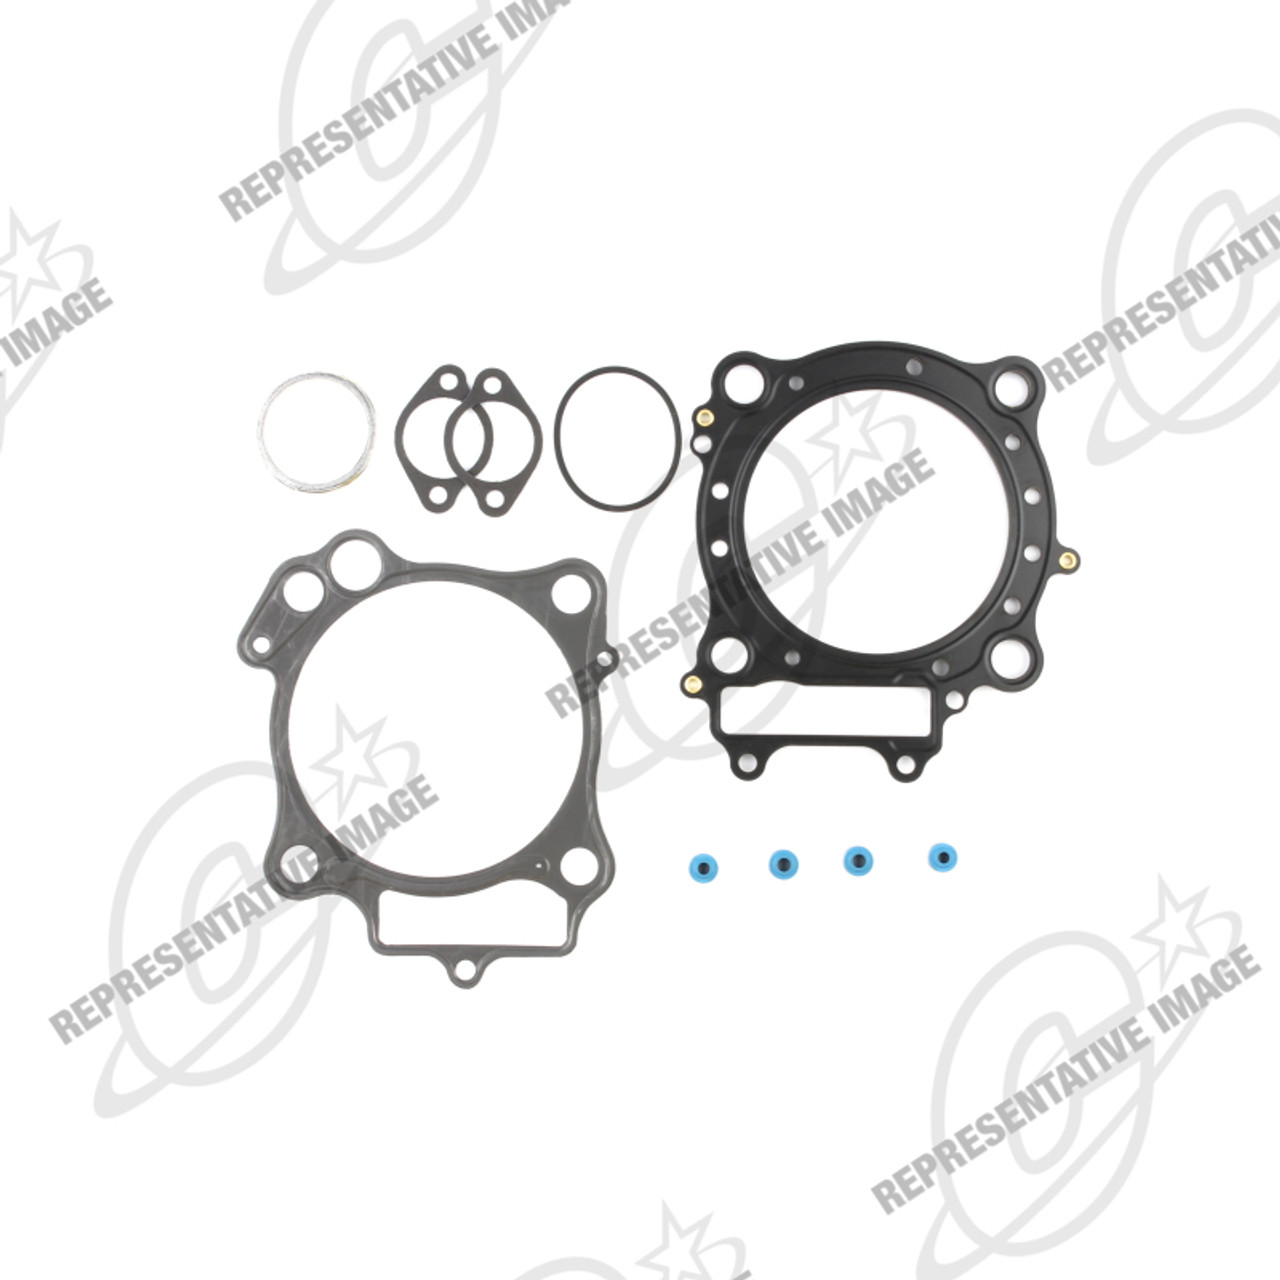 Cometic Harley-Davidson 4 1/8in Twin Cam .044 Head Gasket - C10042-044 Photo - Primary